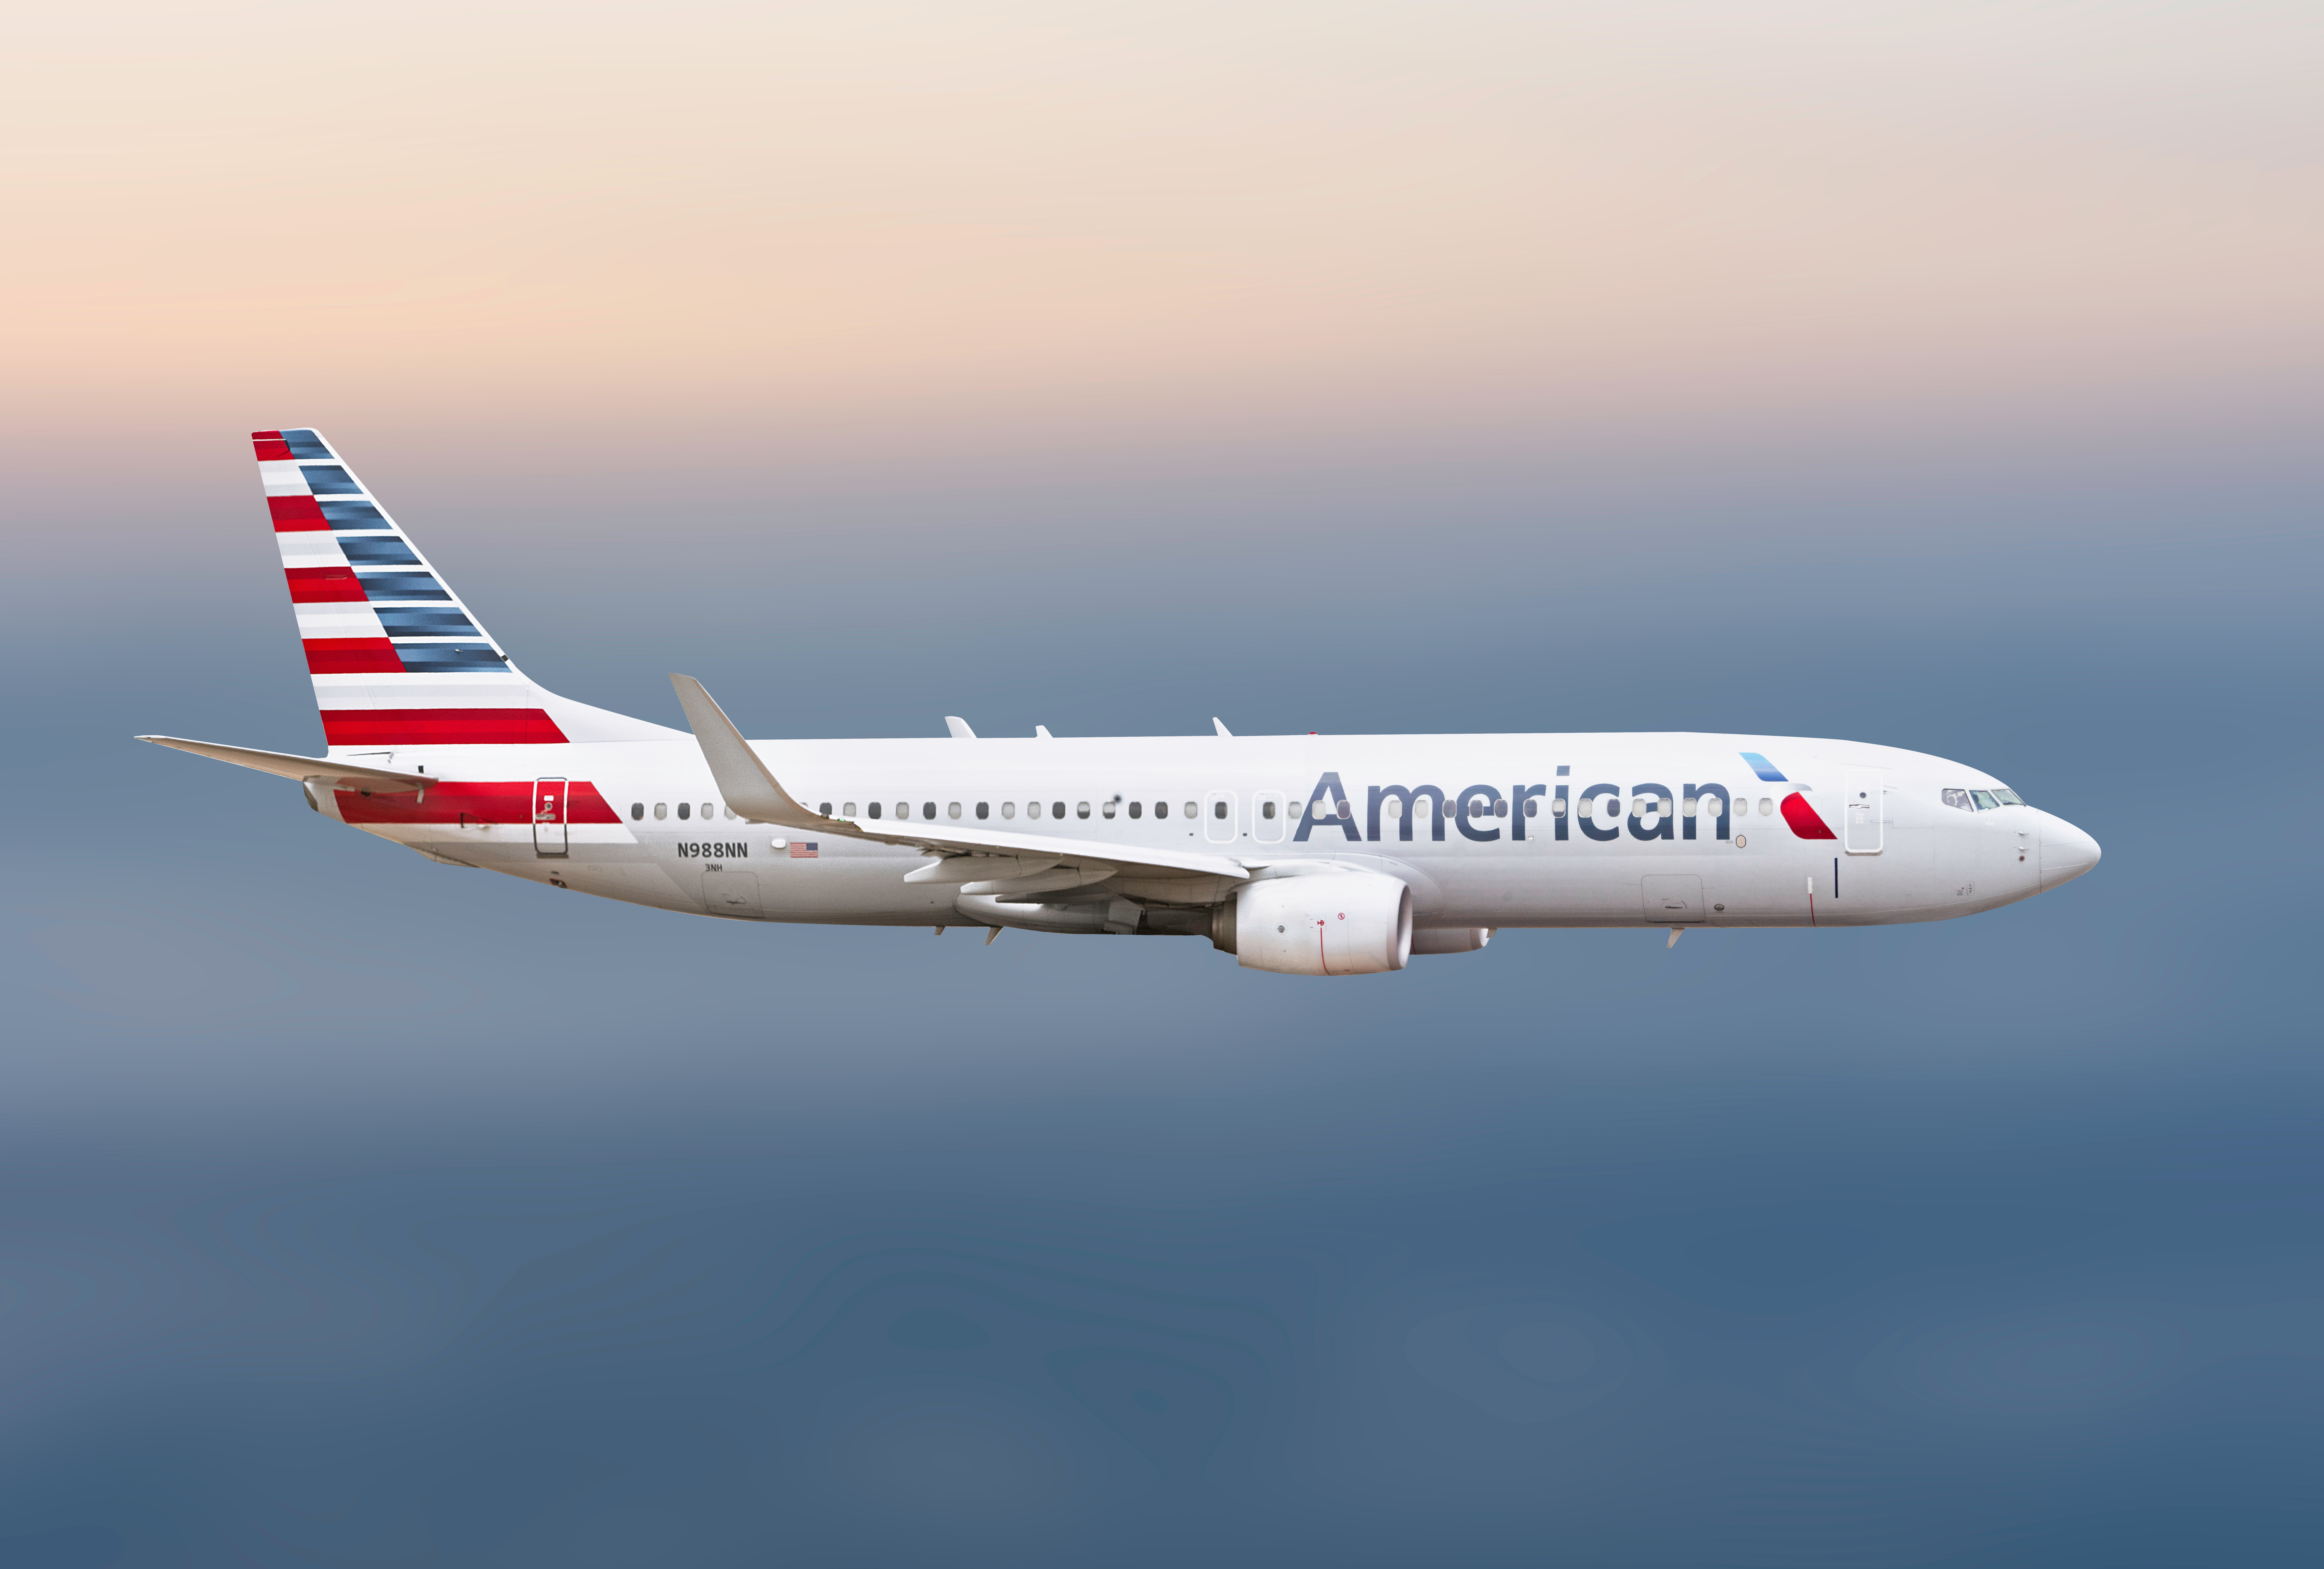 Targeted: Earn 3x AA Miles per dollar on all purchases